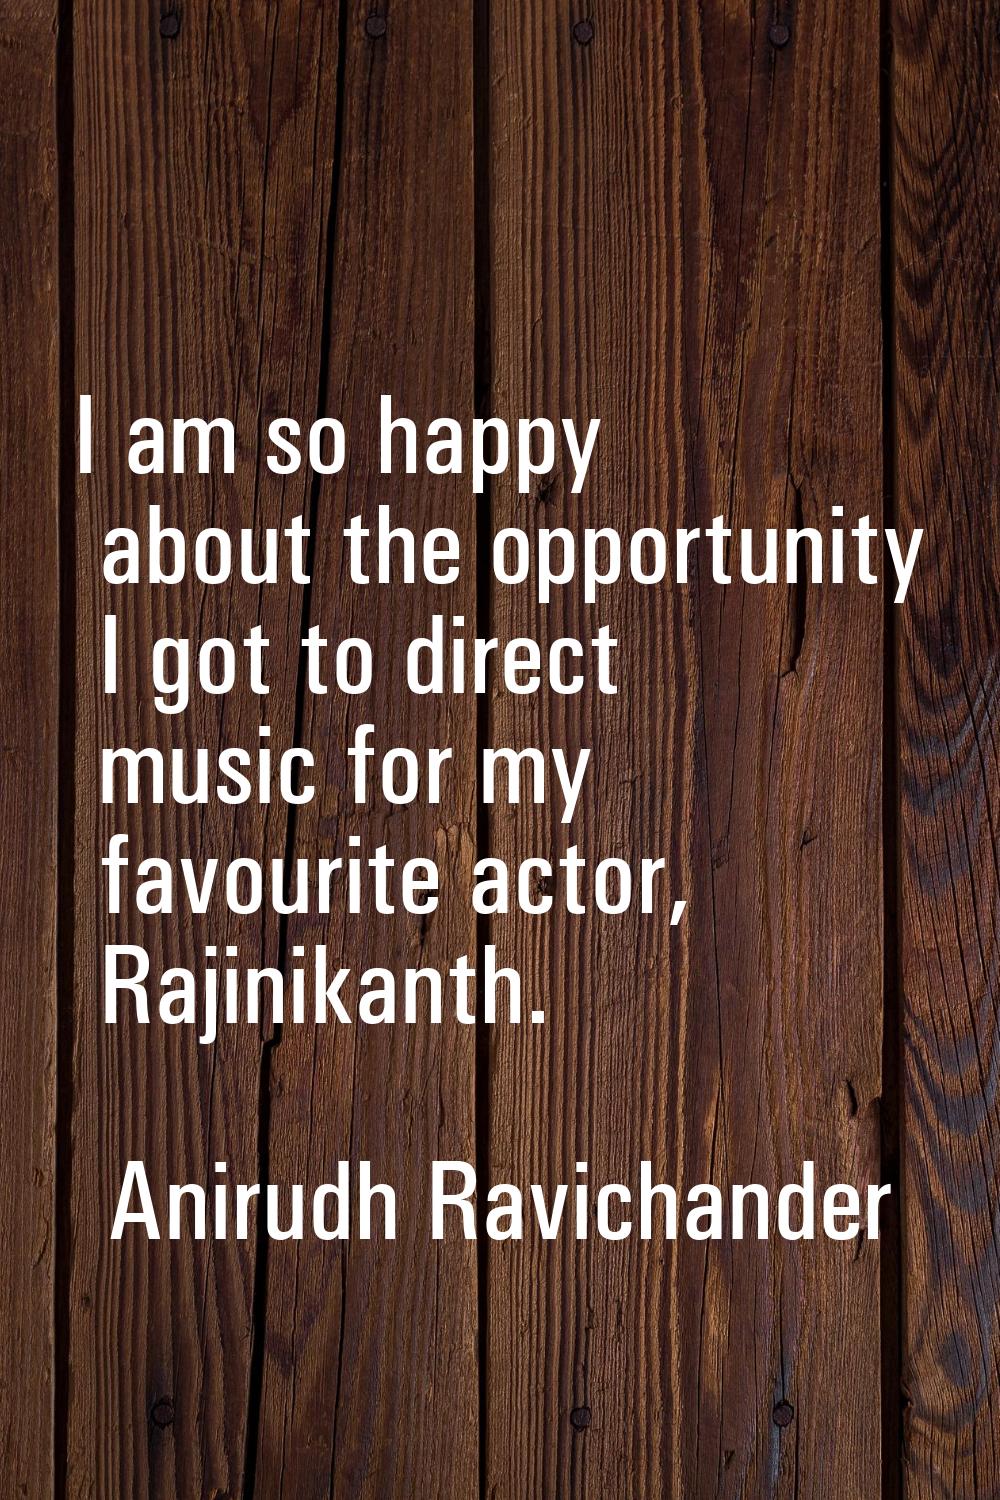 I am so happy about the opportunity I got to direct music for my favourite actor, Rajinikanth.